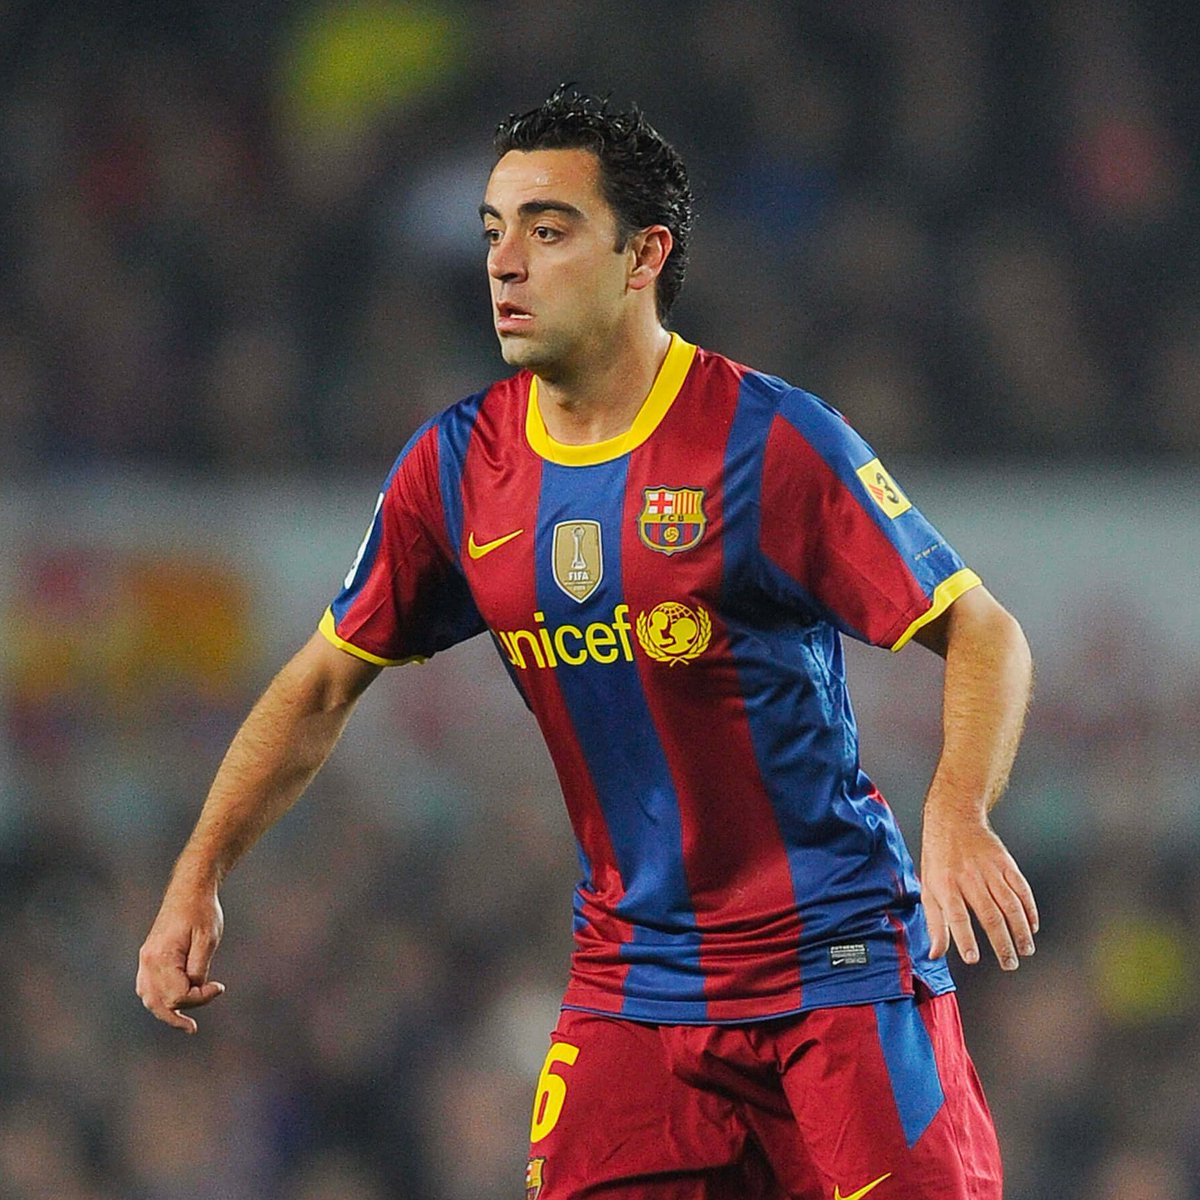 🇪🇸 Xavi's highest rated performance on record (since 2009/10):

🏟️ EURO 2012 Final: Spain 4-0 Italy - 9.38

#WhoScoredAnswers